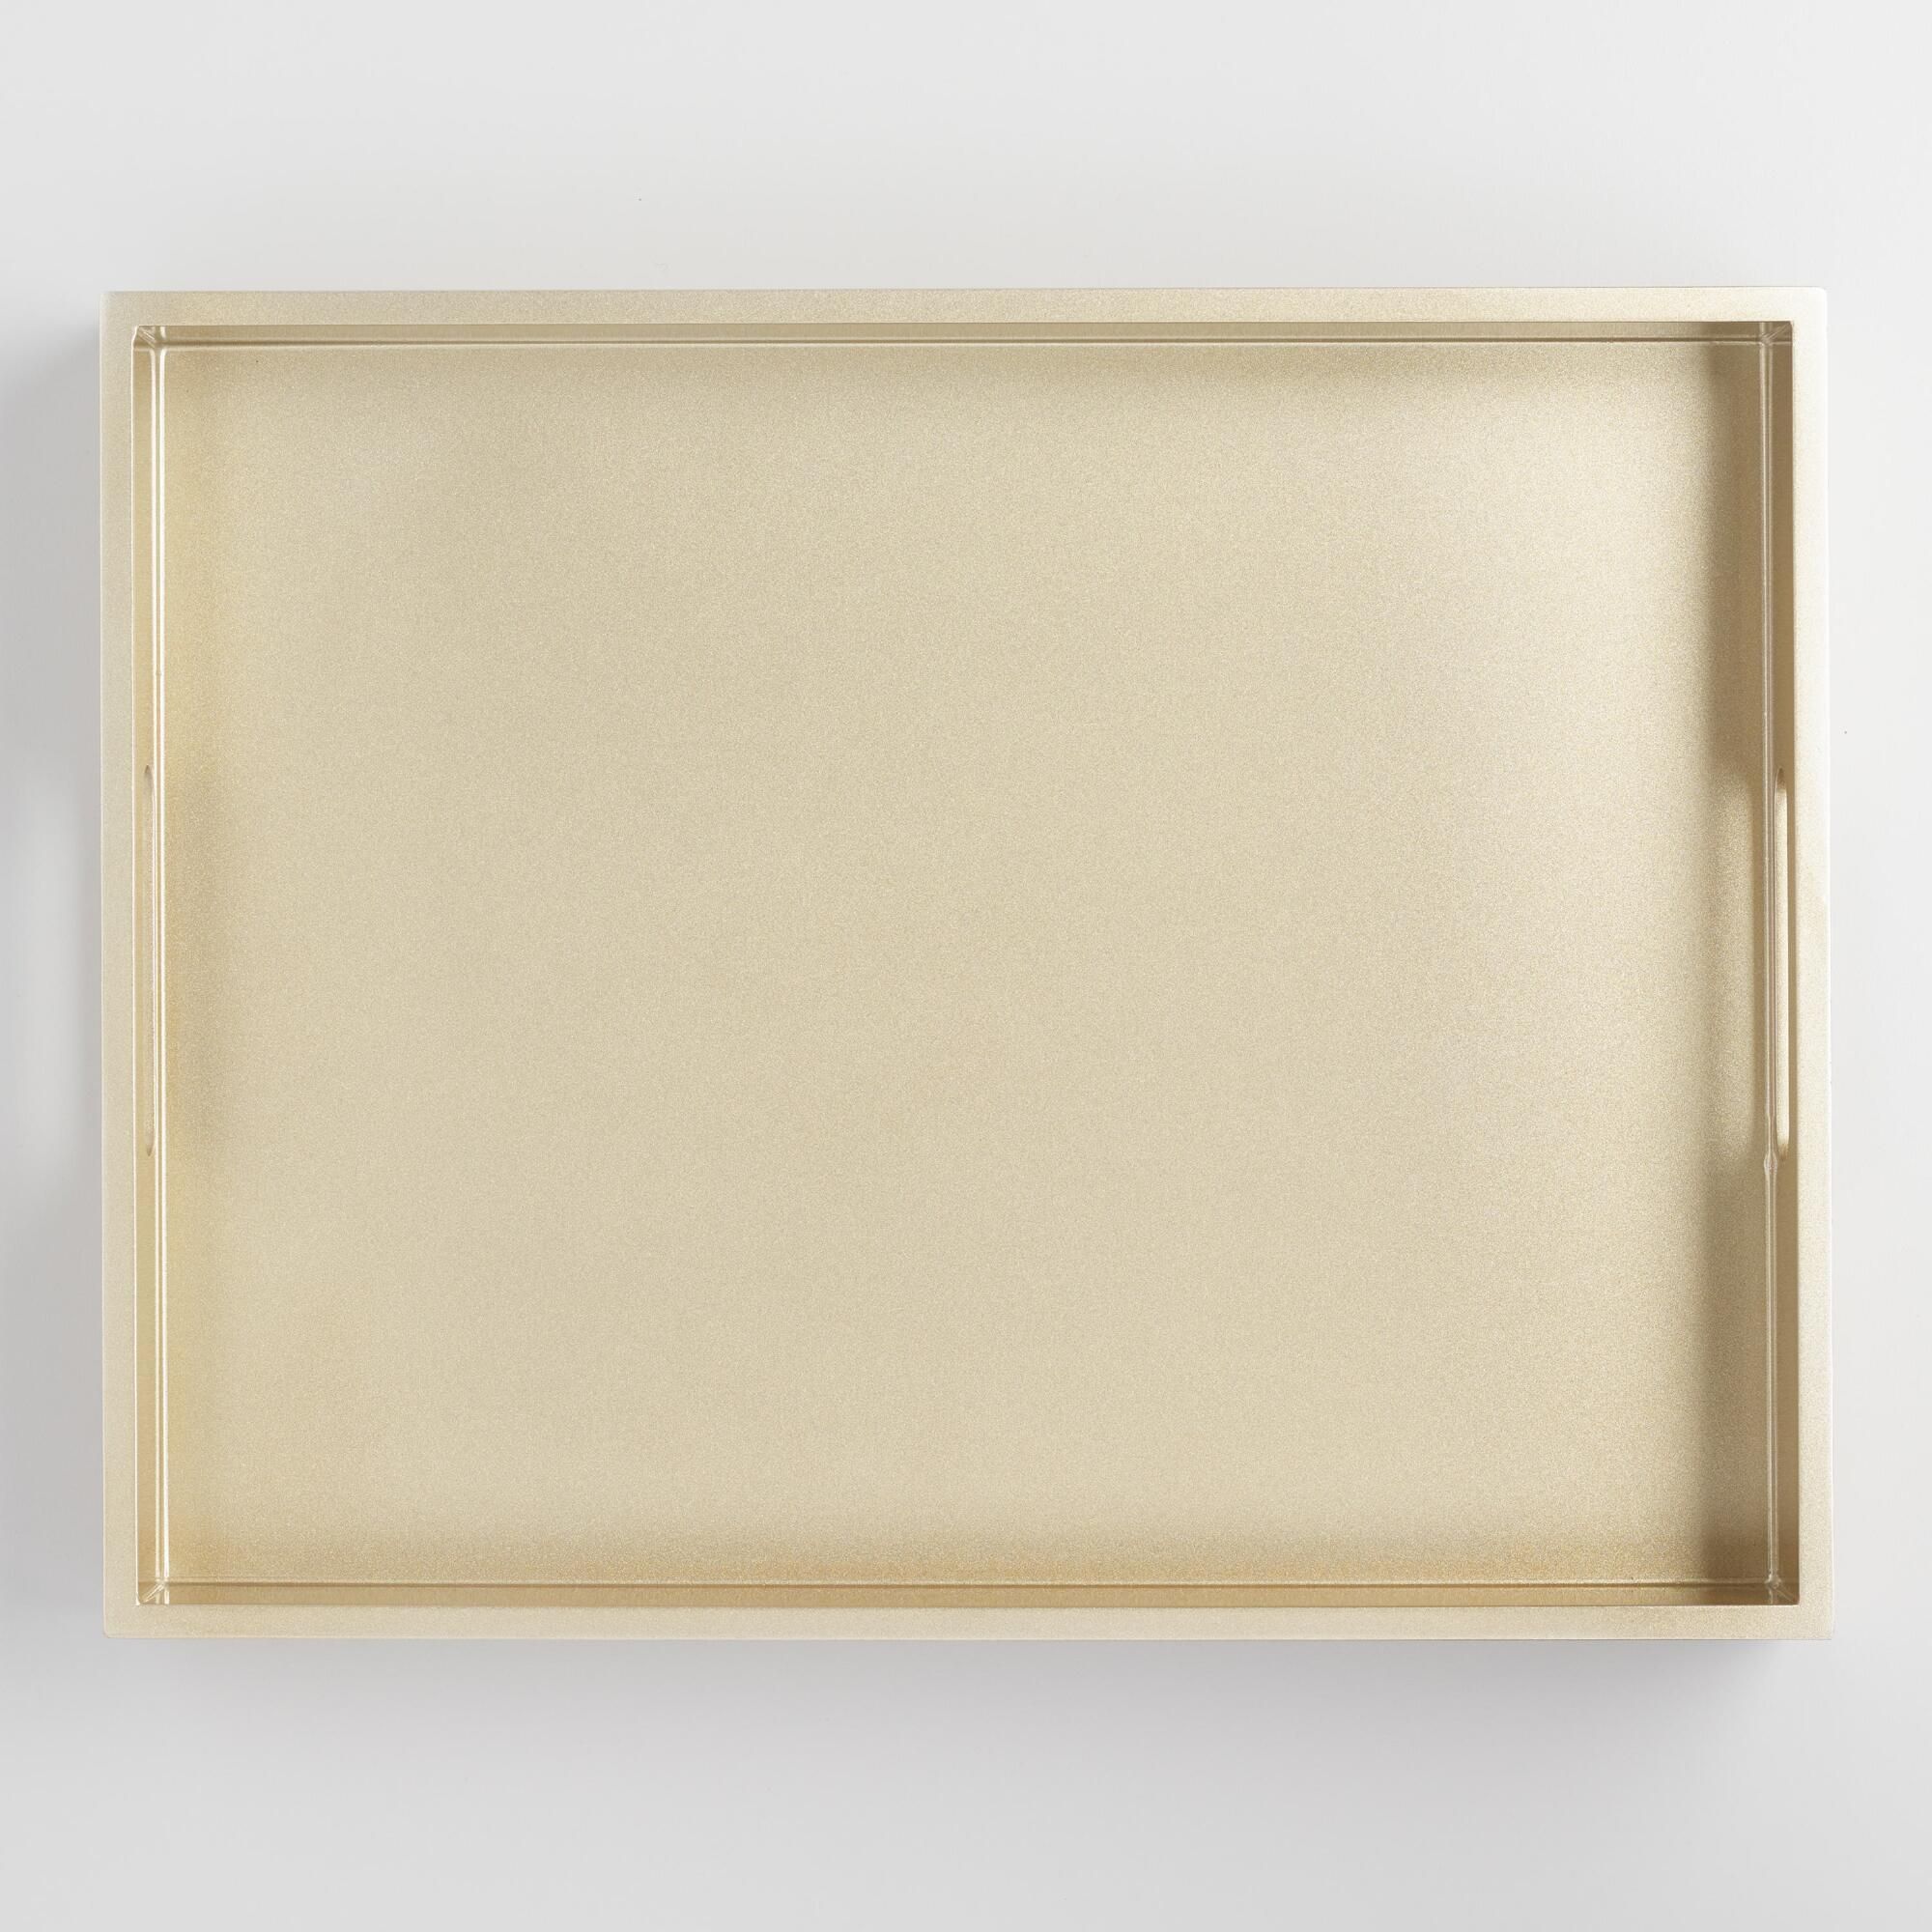 Golden Sparkle Lacquer Serving Tray by World Market | World Market